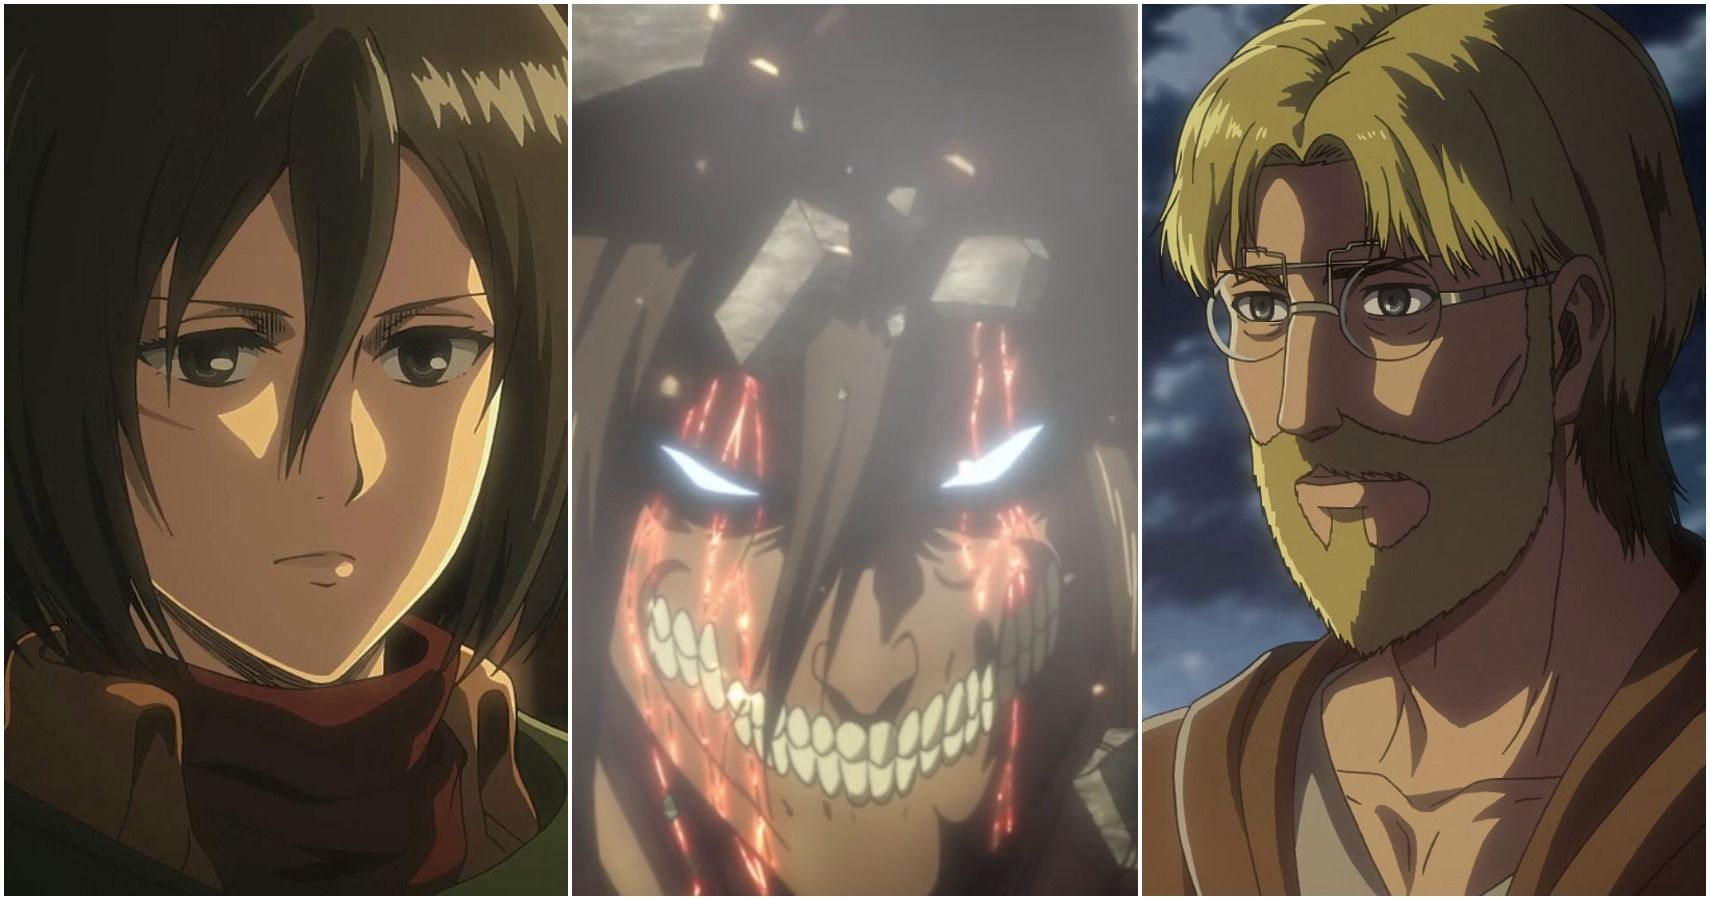 Attack On Titan: 5 Ways It Will Age Well (& 5 Reasons Why It Won't)